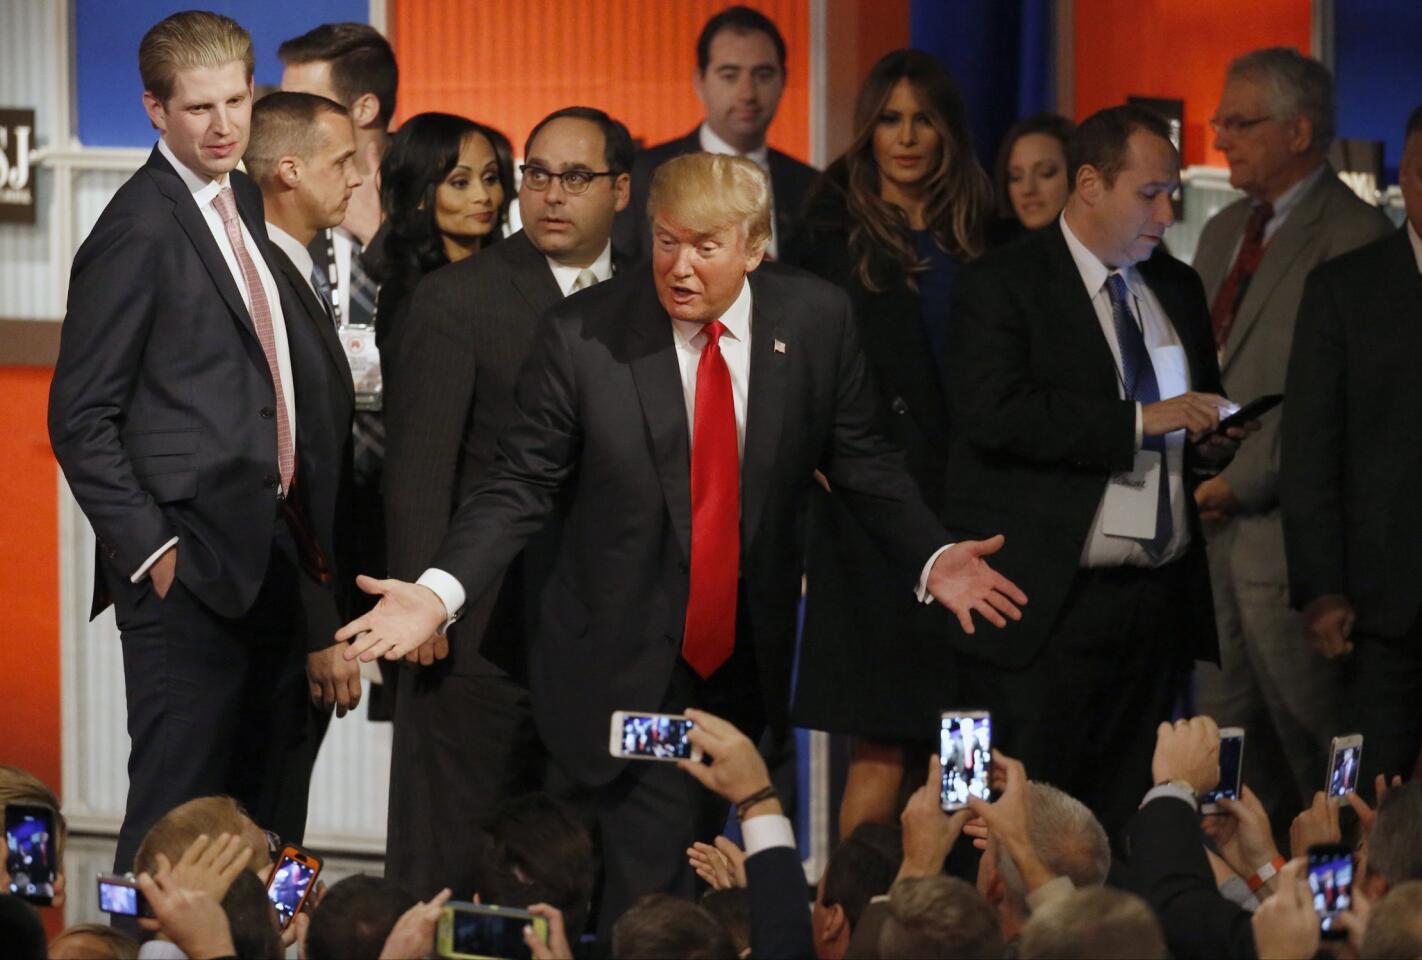 Donald Trump talks to supporters after the Republican presidential debate at the Milwaukee Theatre.